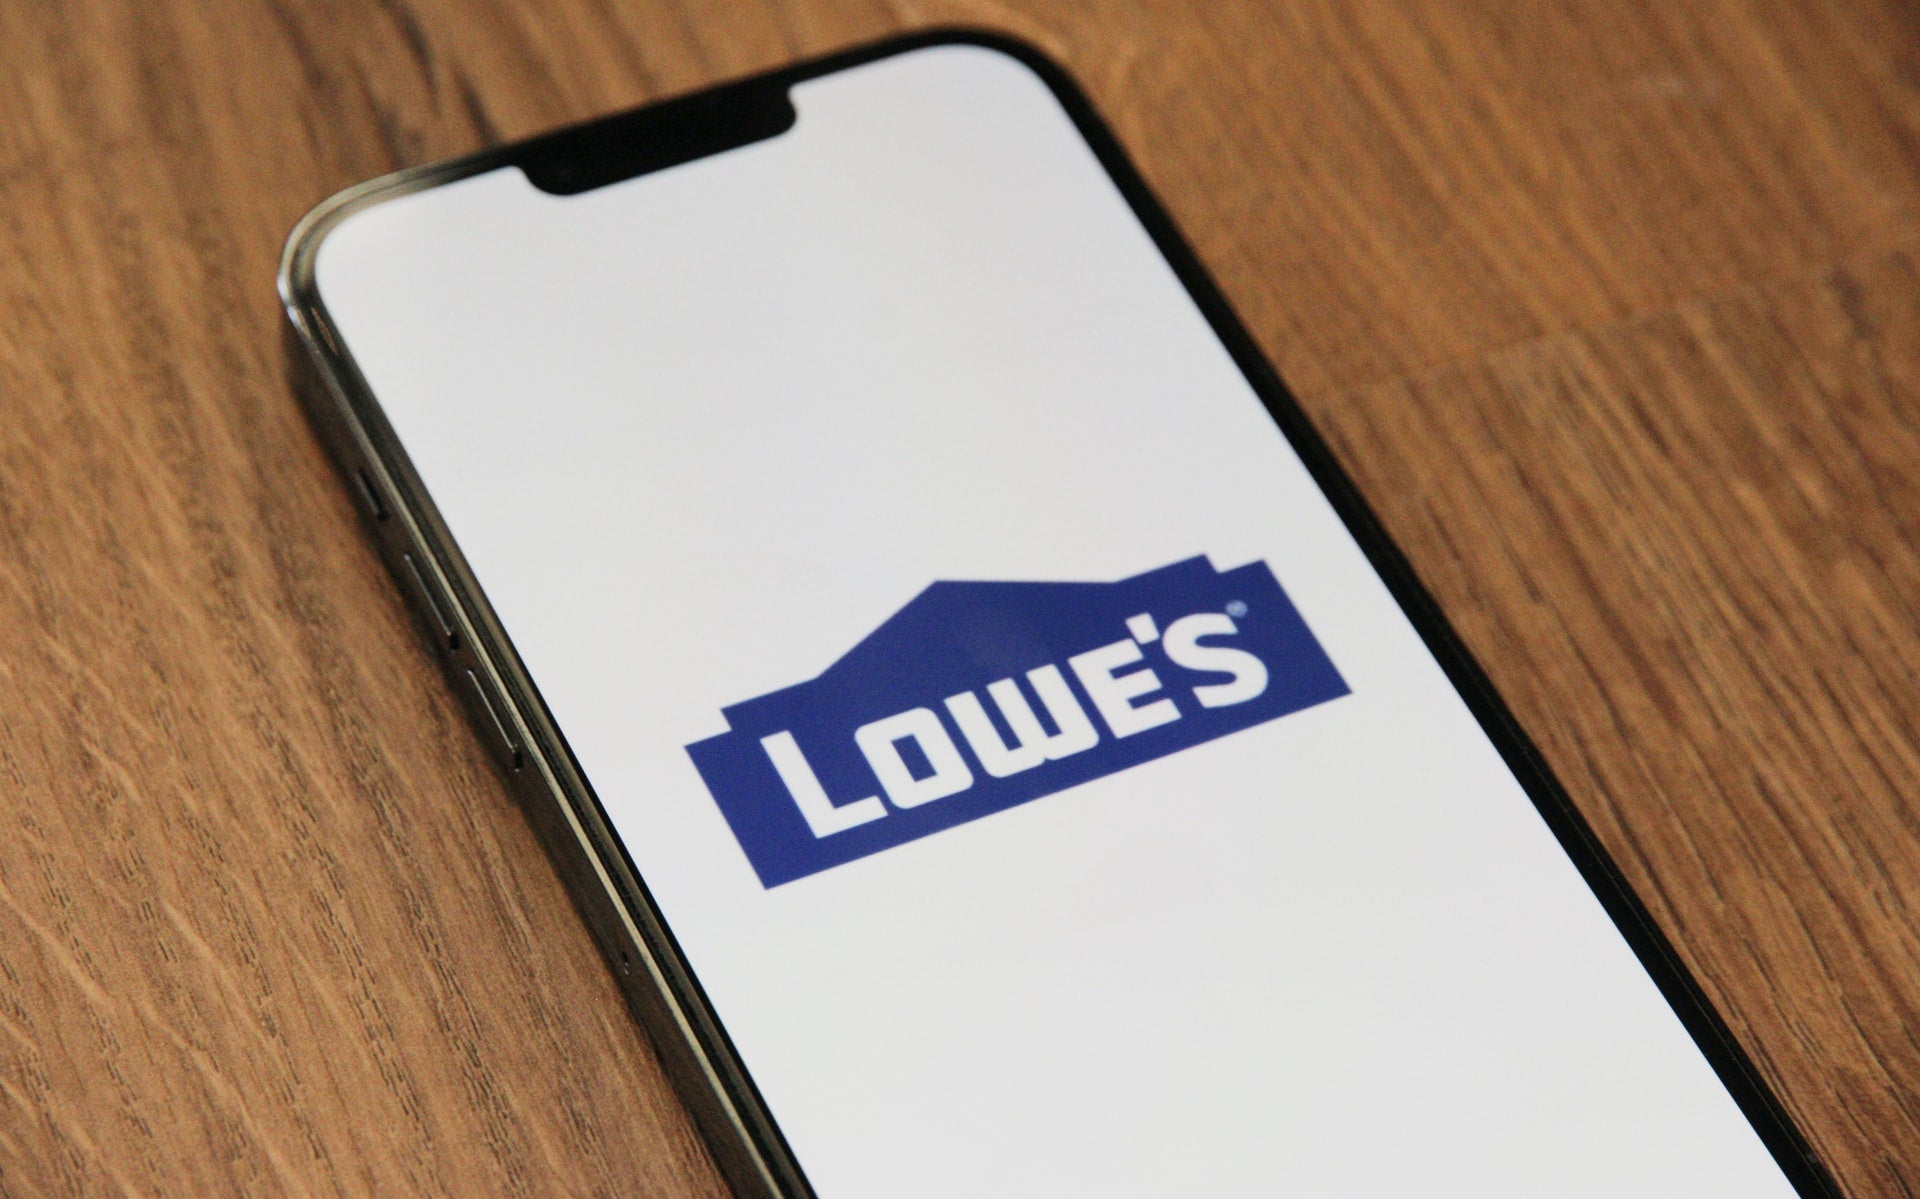 Lowe's posts $23.7bn in total sales for first quarter of FY22